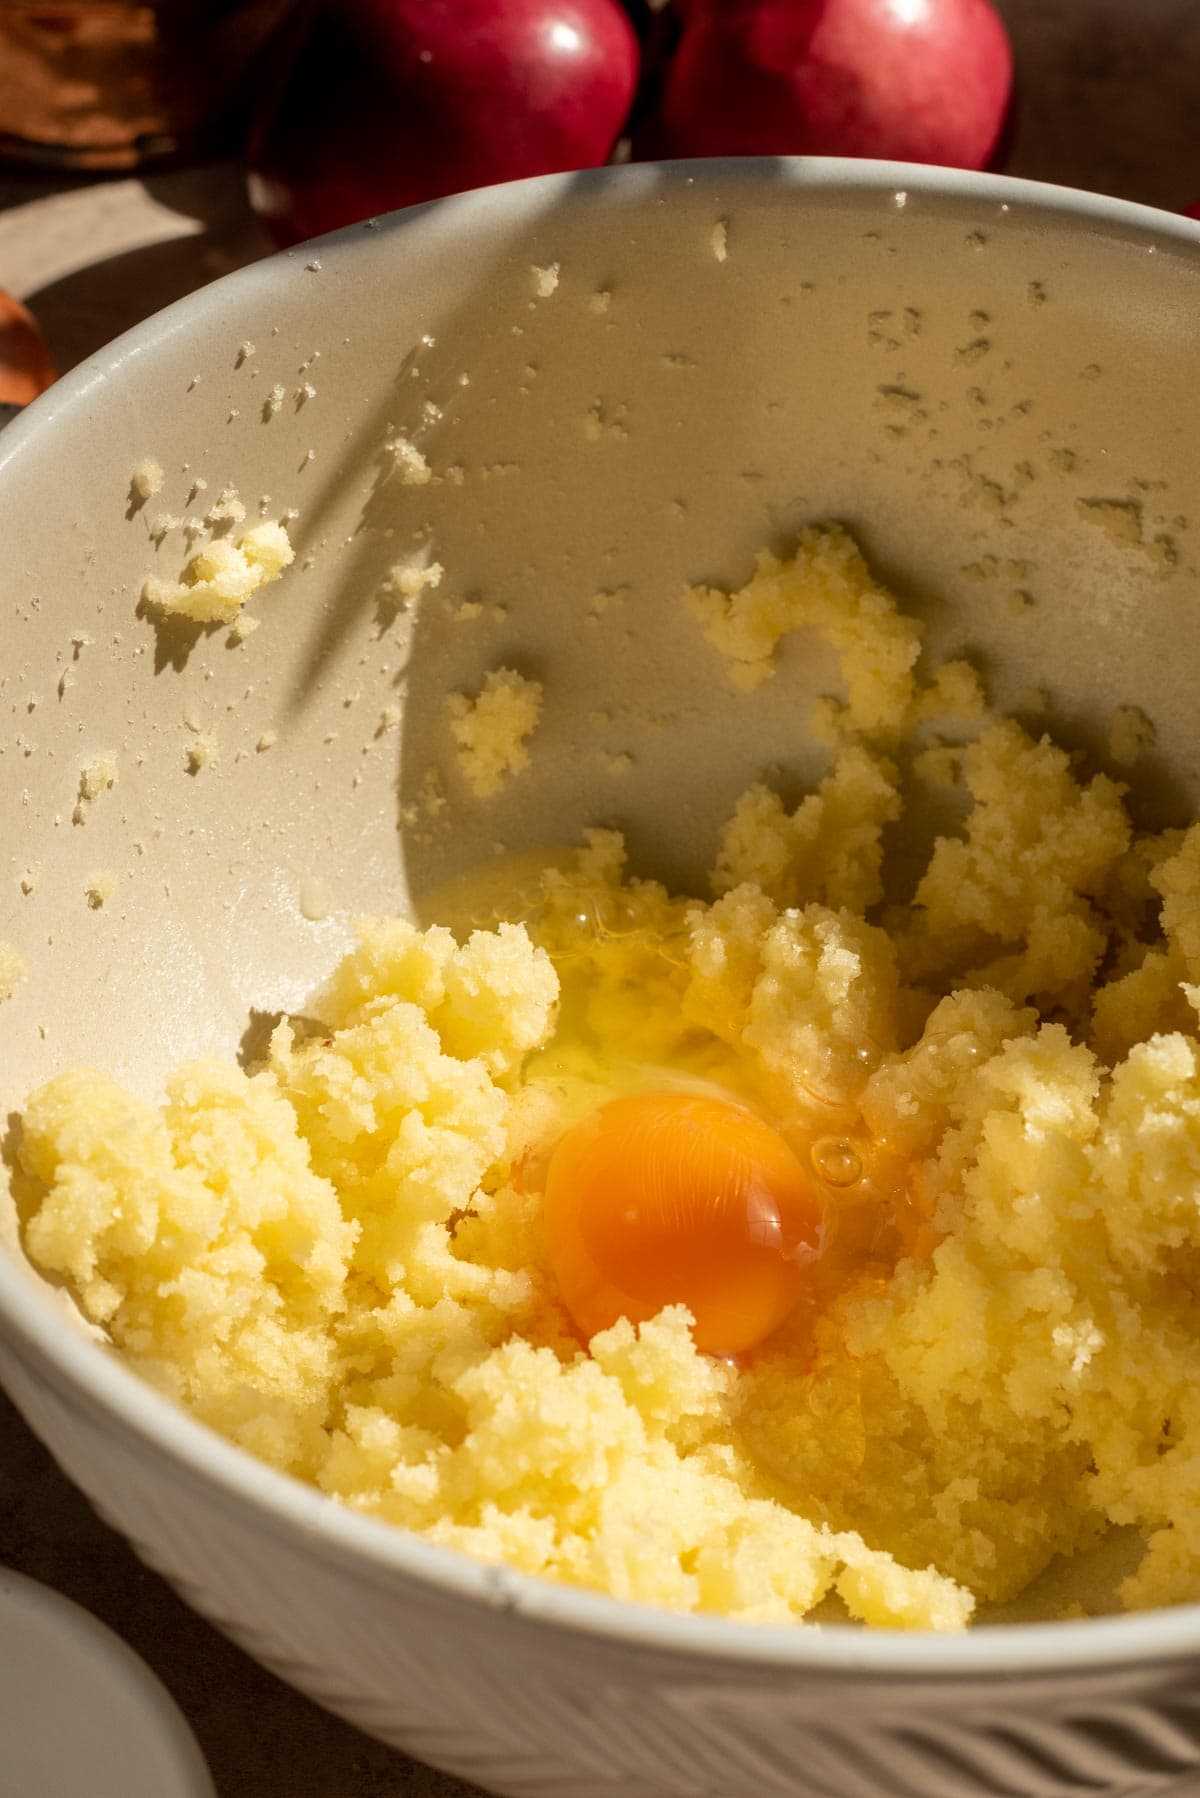 The butter and the sugar mixed in a cream bowl with one egg sitting in the mixture.